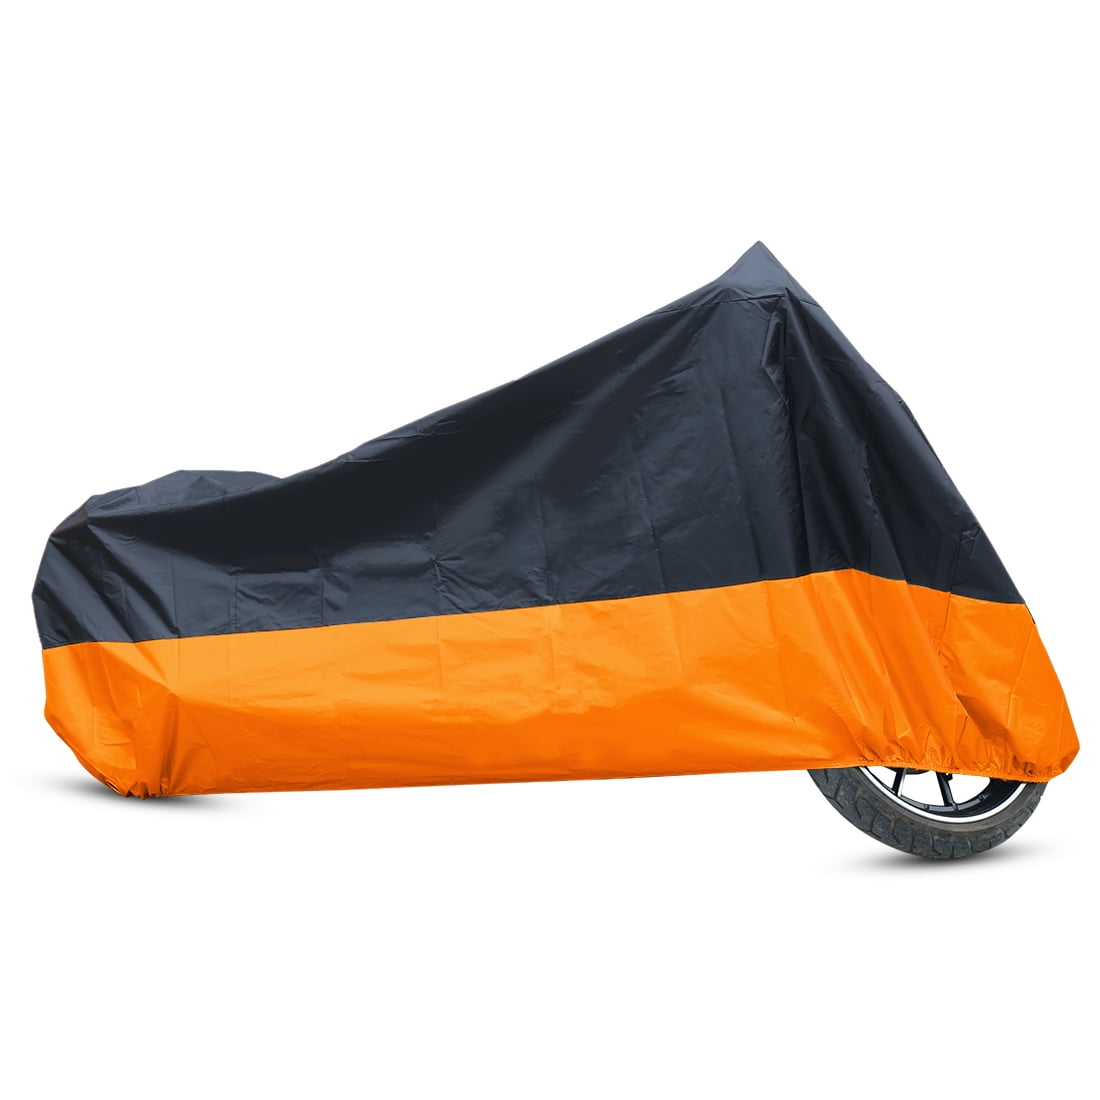 XXXL Oxford Motorcycle Rain Cover Fit For Harley Davidson Electra Glide Classic 